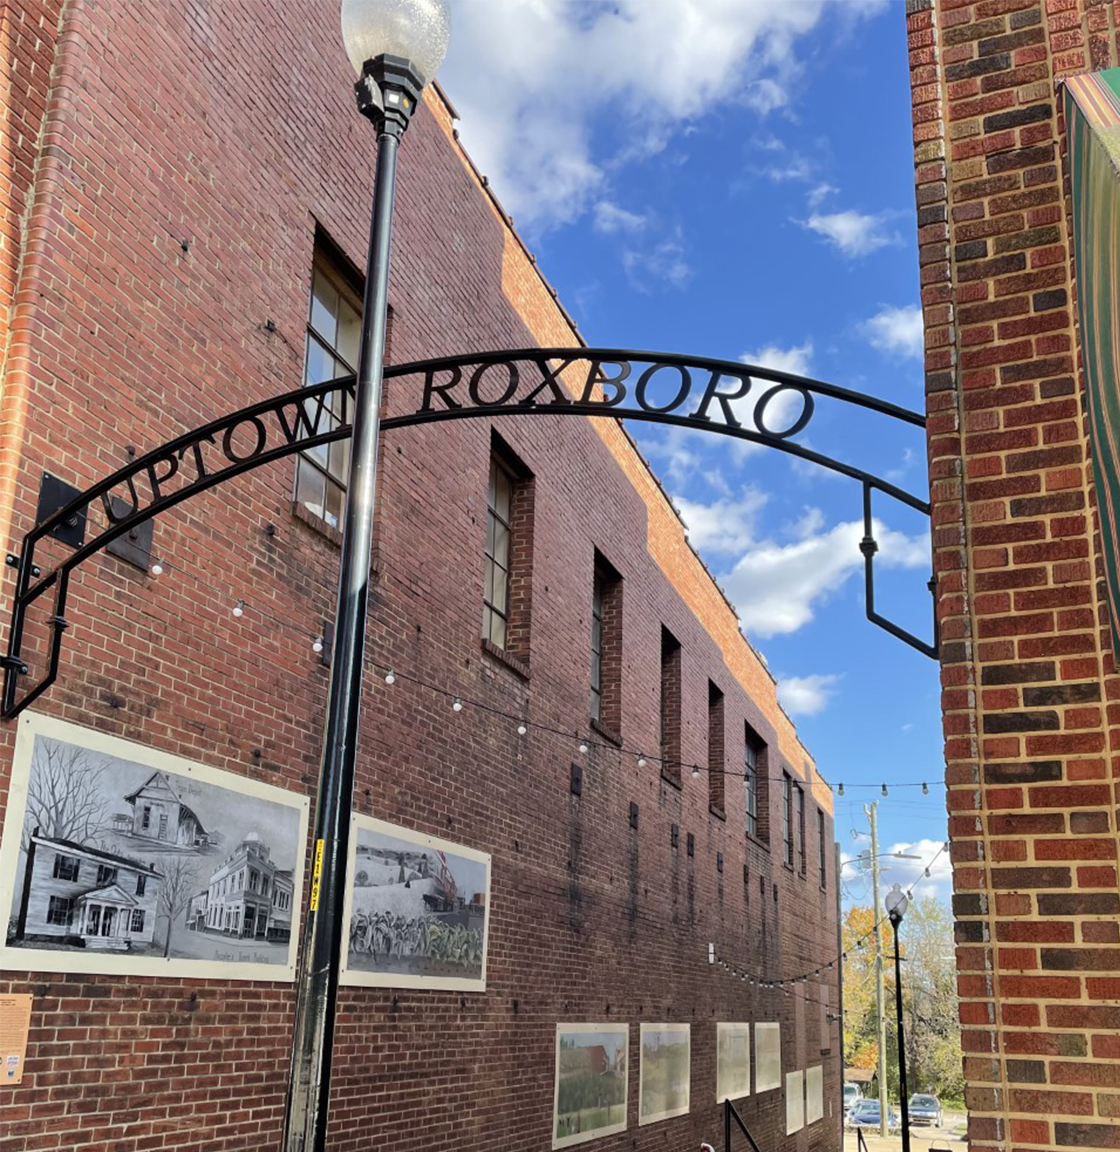 A black metal sign reading 'Uptown Roxboro' suspended between two red brick buildings